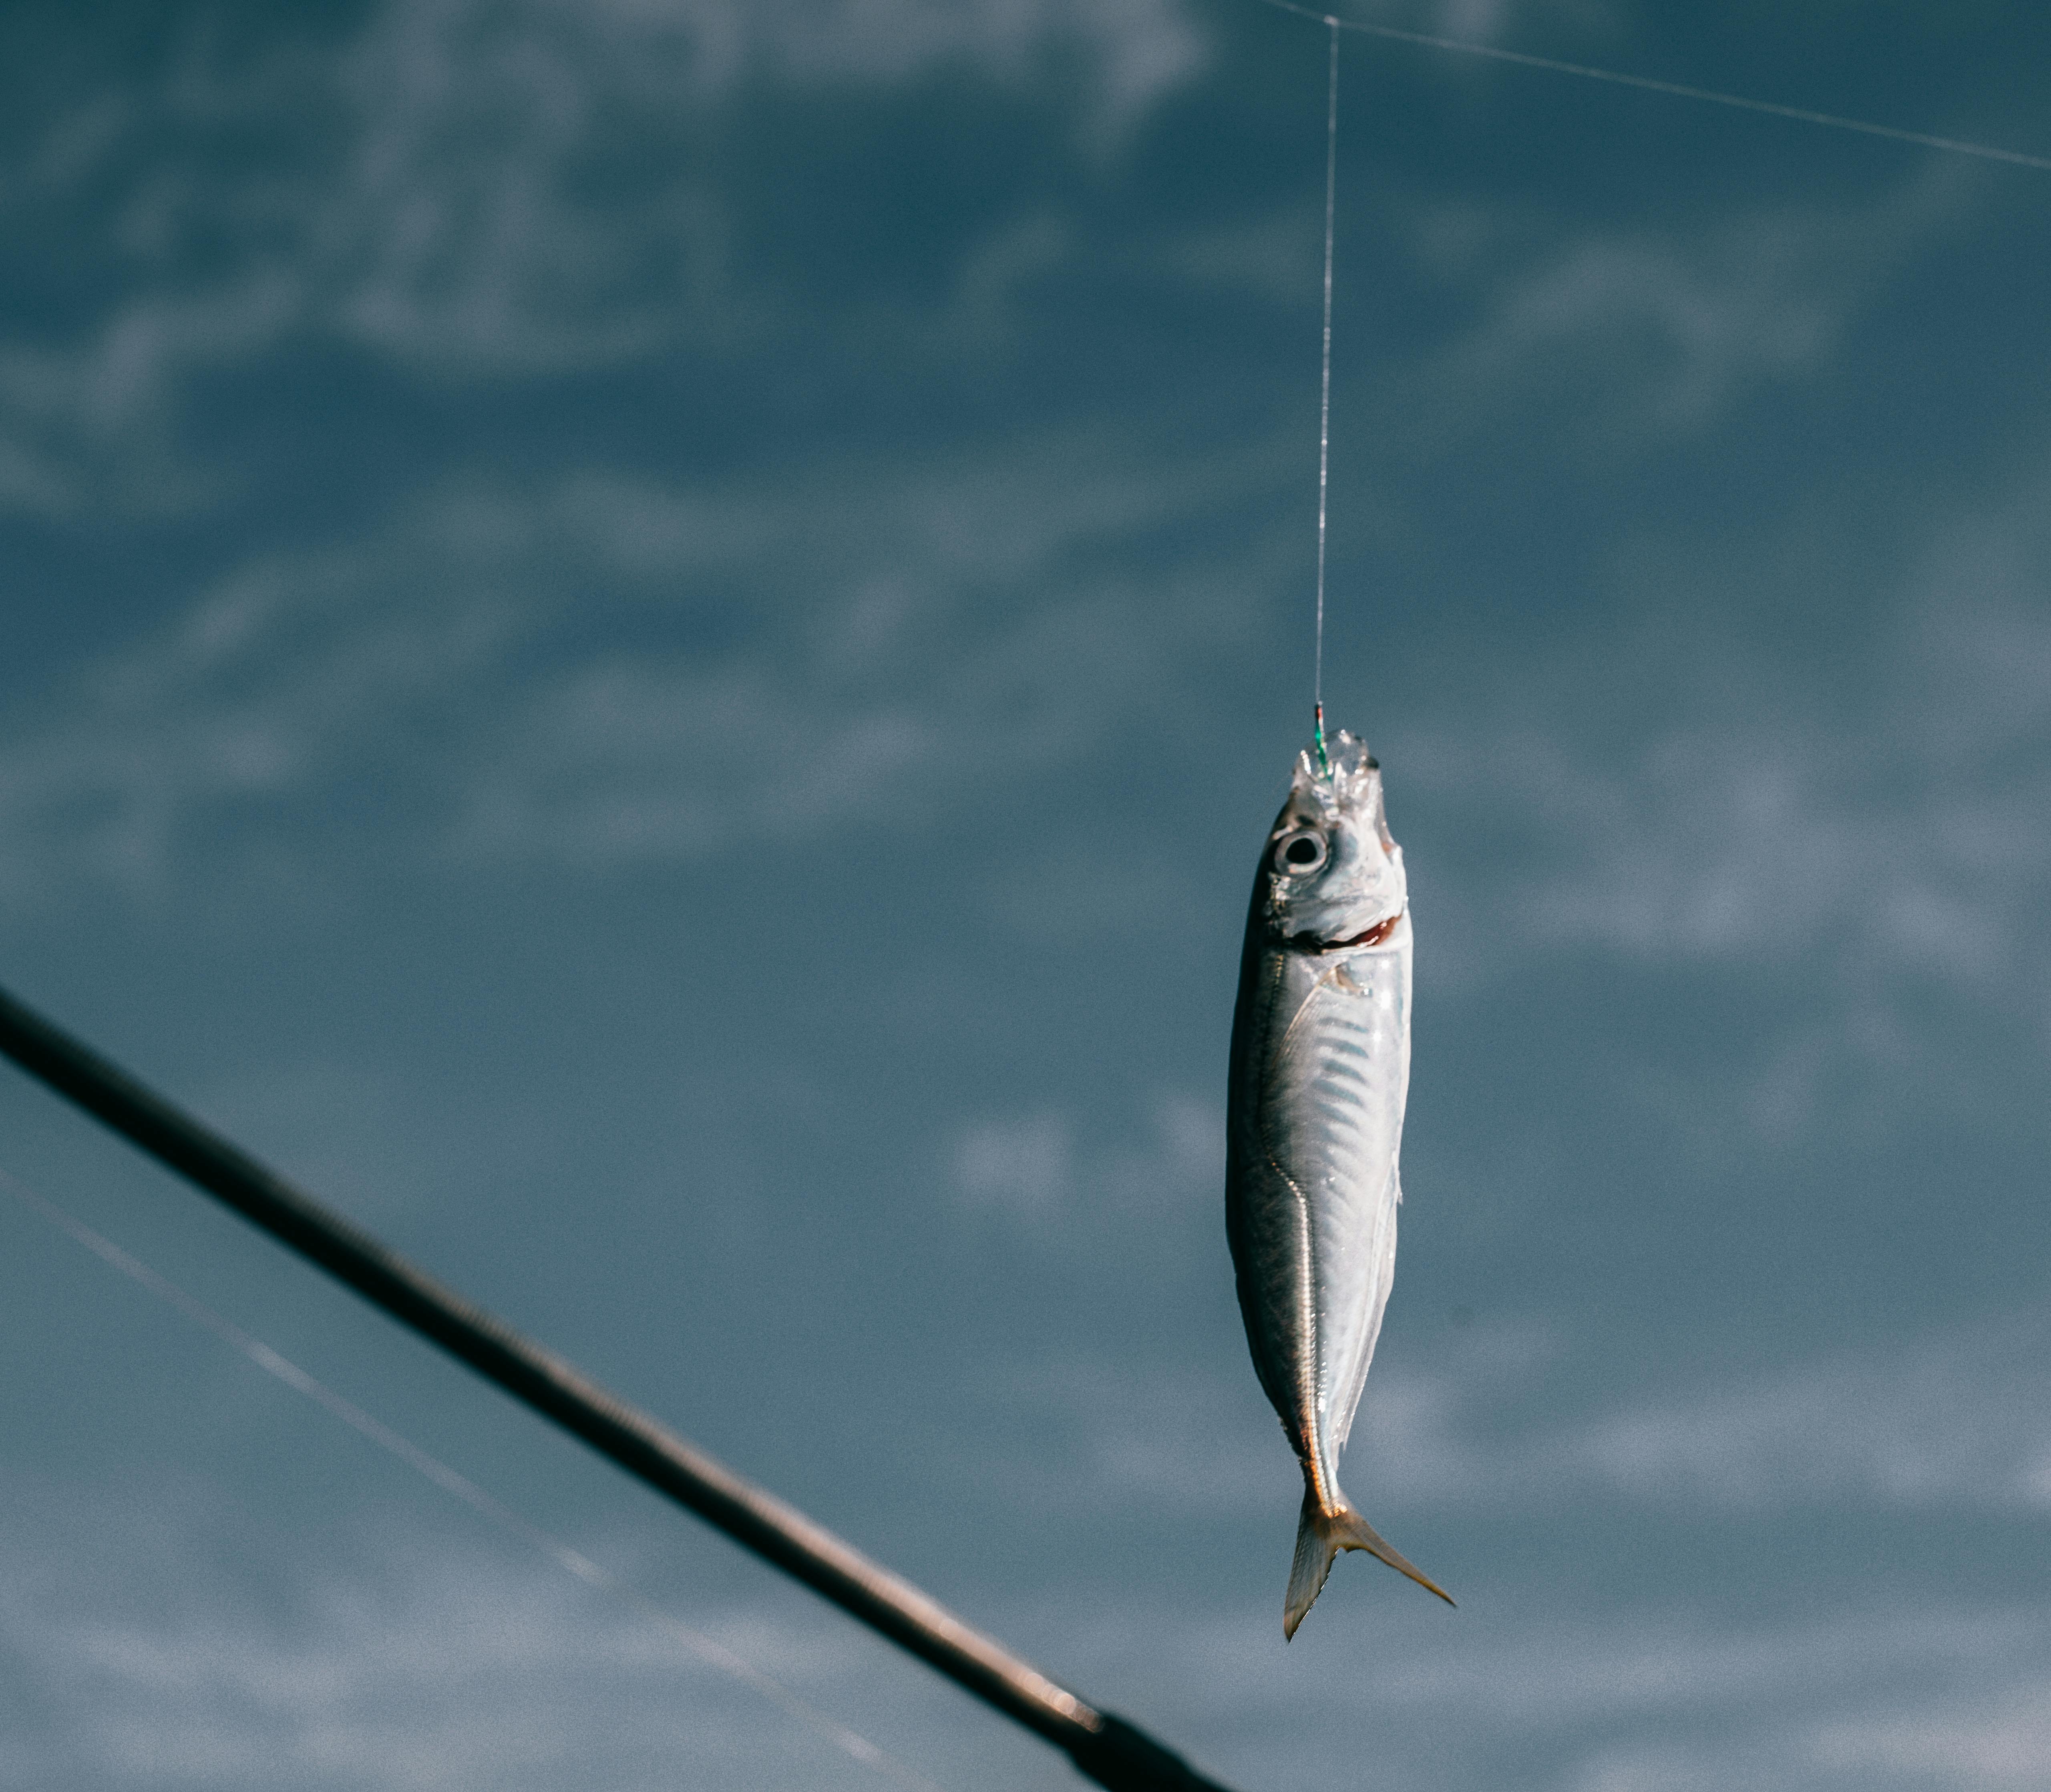 Fish hanging on hook against blurred background · Free Stock Photo